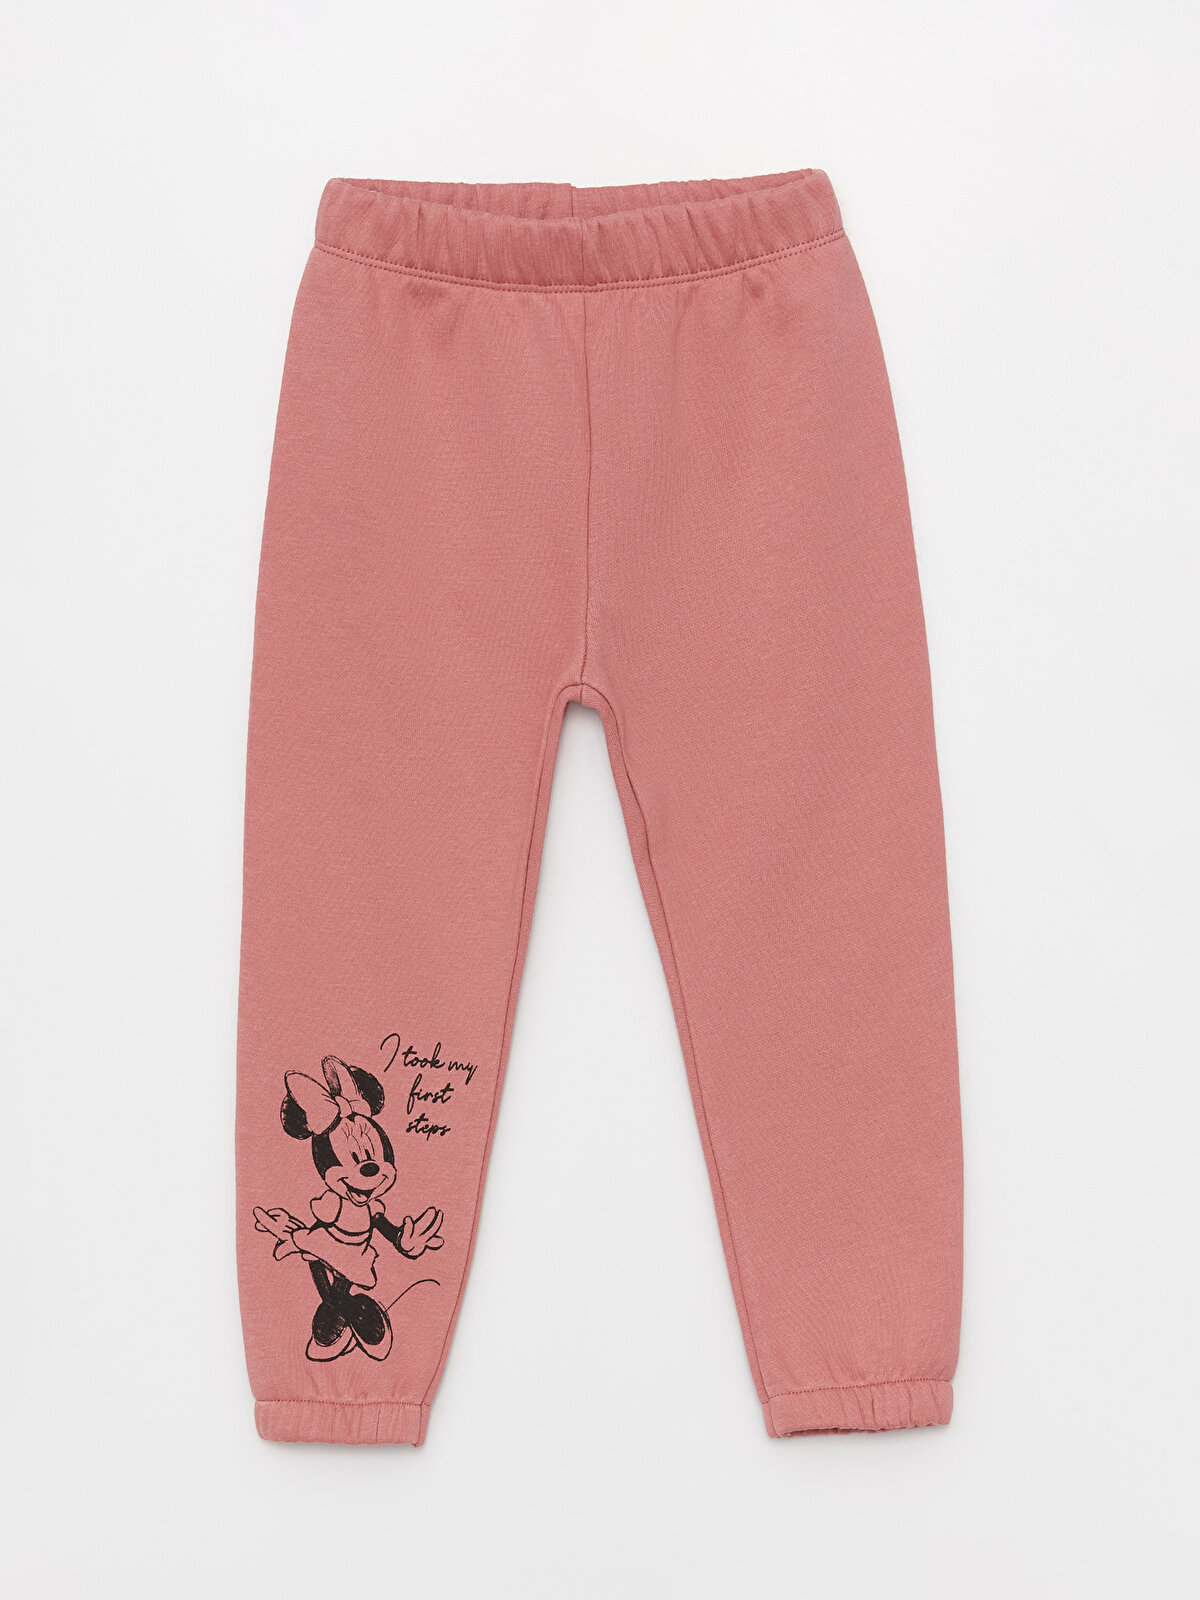 Printed Joggers - Dusty rose/Minnie Mouse - Kids